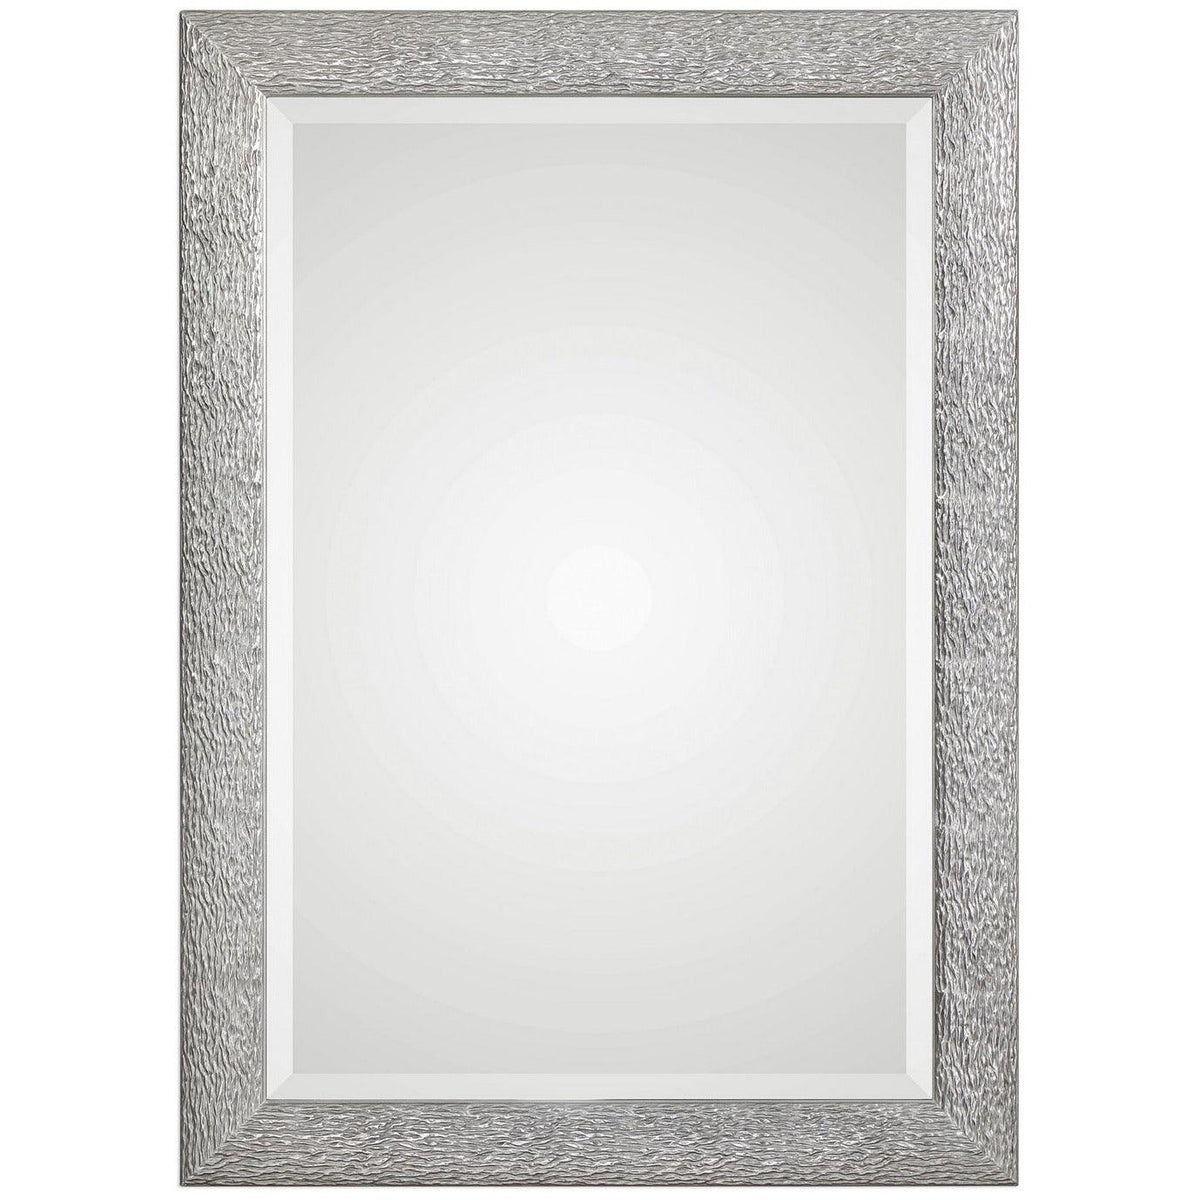 The Uttermost - Mossley Mirror - 09361 | Montreal Lighting & Hardware